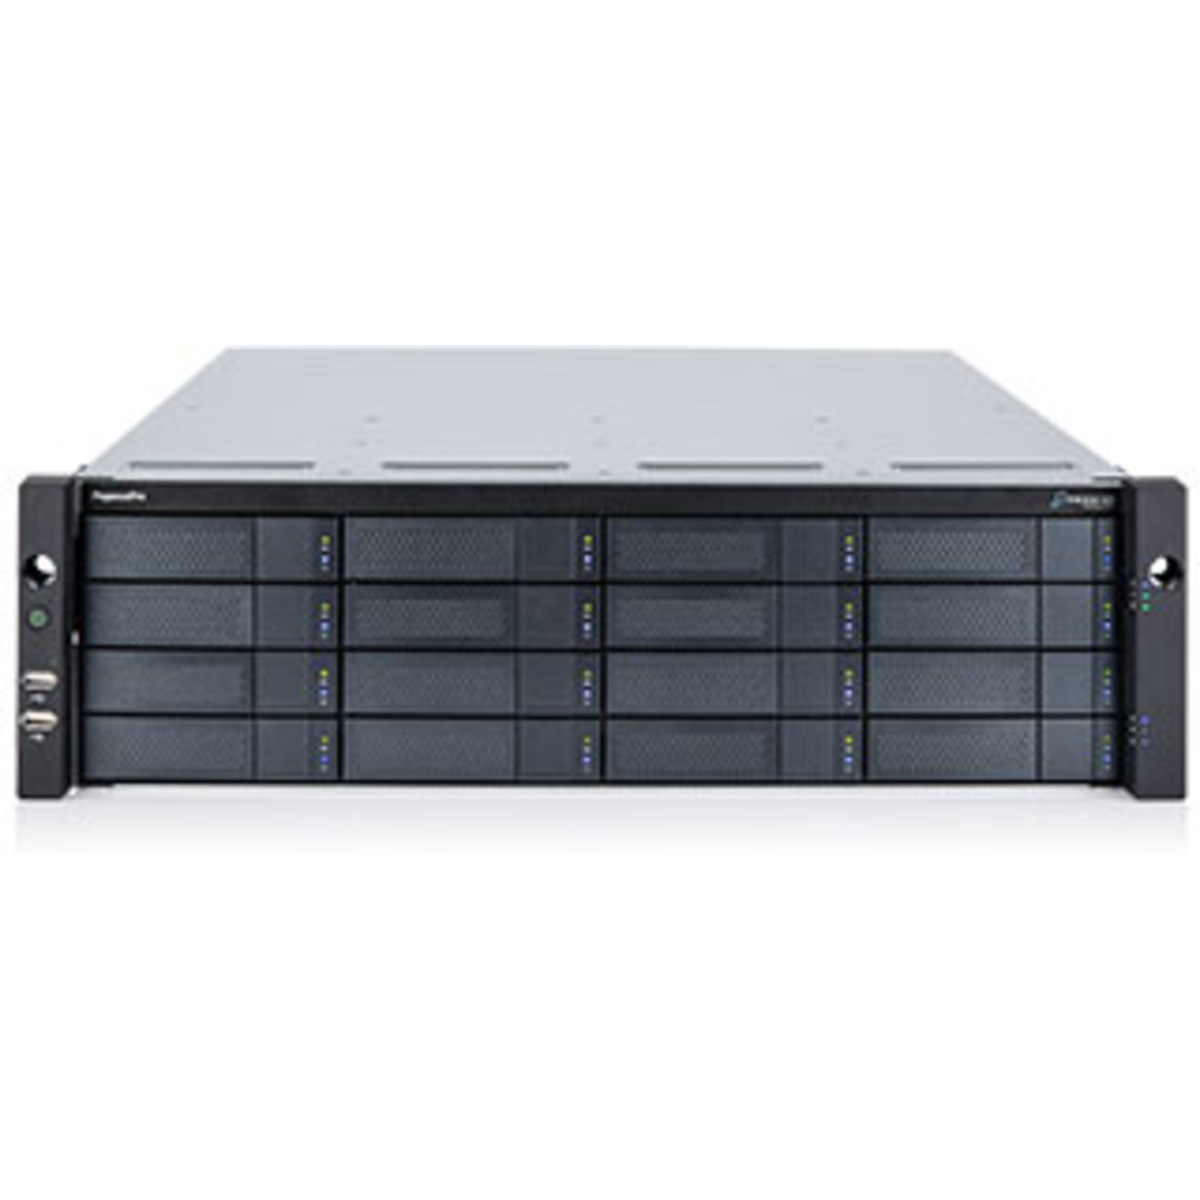 Promise Technology PegasusPro R16 154tb 16-Bay RackMount Multimedia / Power User / Business DAS-NAS - Combo Direct + Network Storage Device 11x14tb Western Digital Gold WD142KRYZ 3.5 7200rpm SATA 6Gb/s HDD ENTERPRISE Class Drives Installed - Burn-In Tested PegasusPro R16